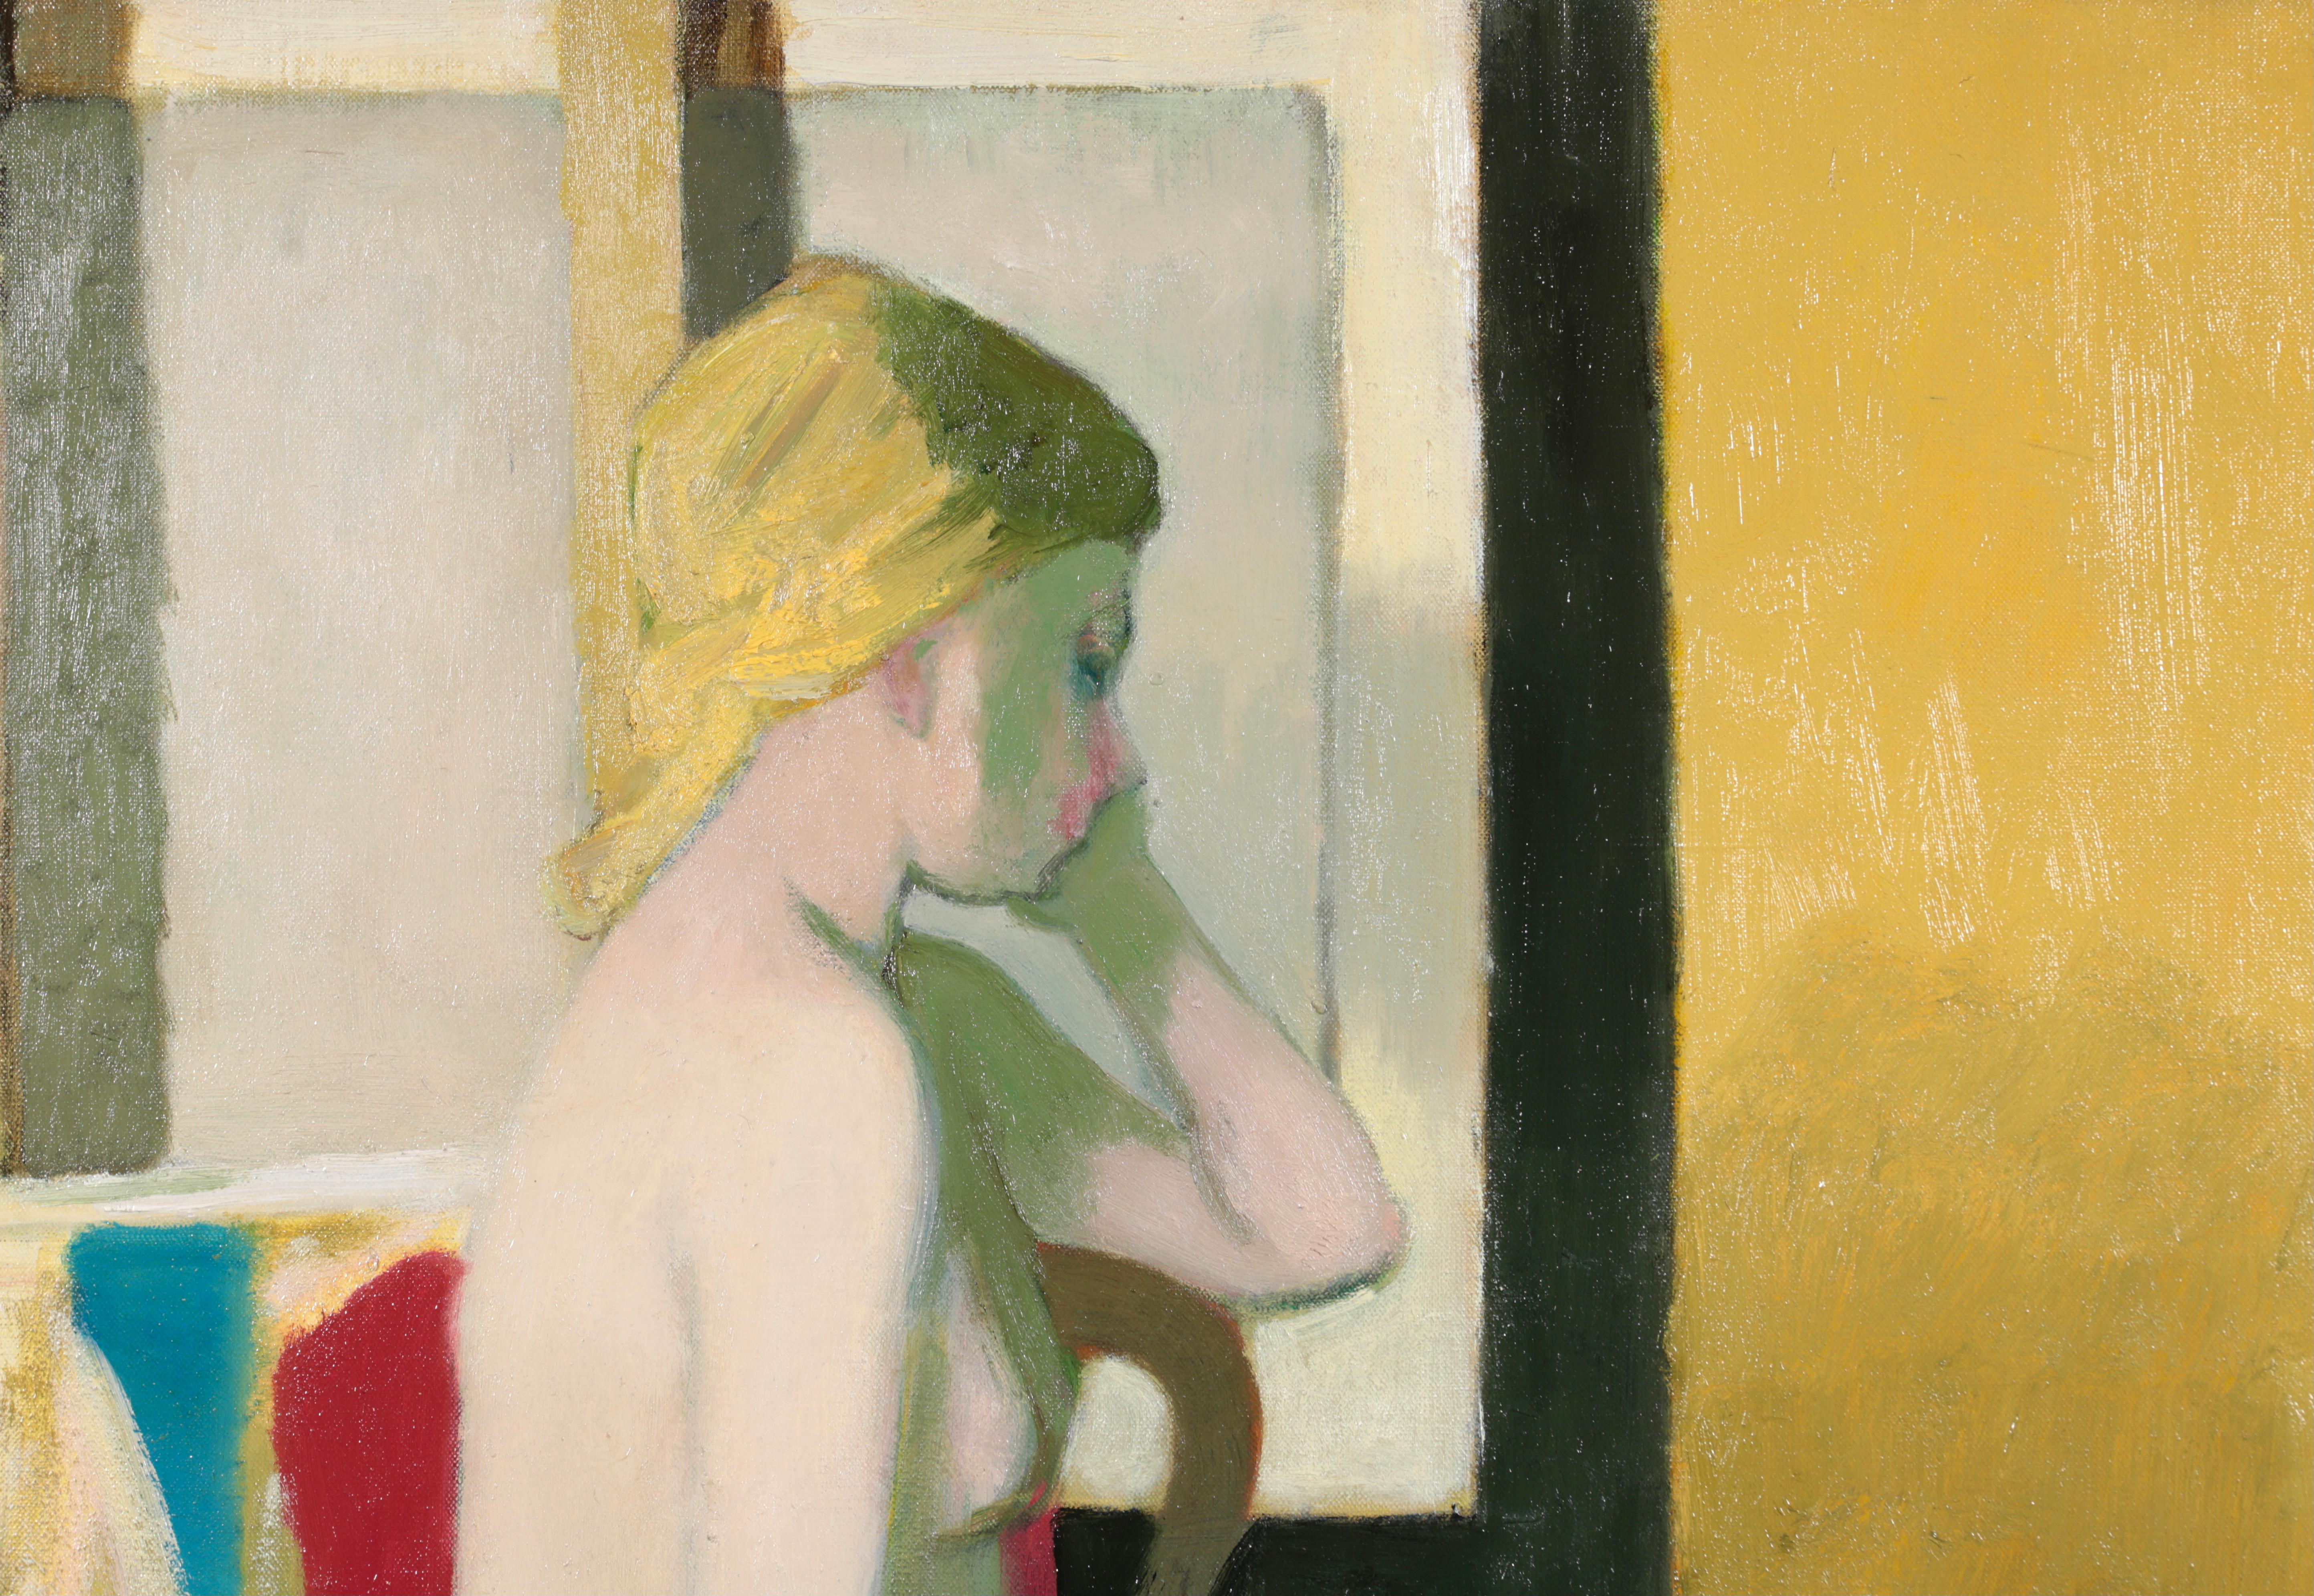 Wonderful oil on canvas circa 1960 by French modernist painter Maurice Brianchon. The work depicts a blonde-haired nude seated on a wooden chair turned away from the artist with her chin resting in her hand. 

Signature:
Signed lower